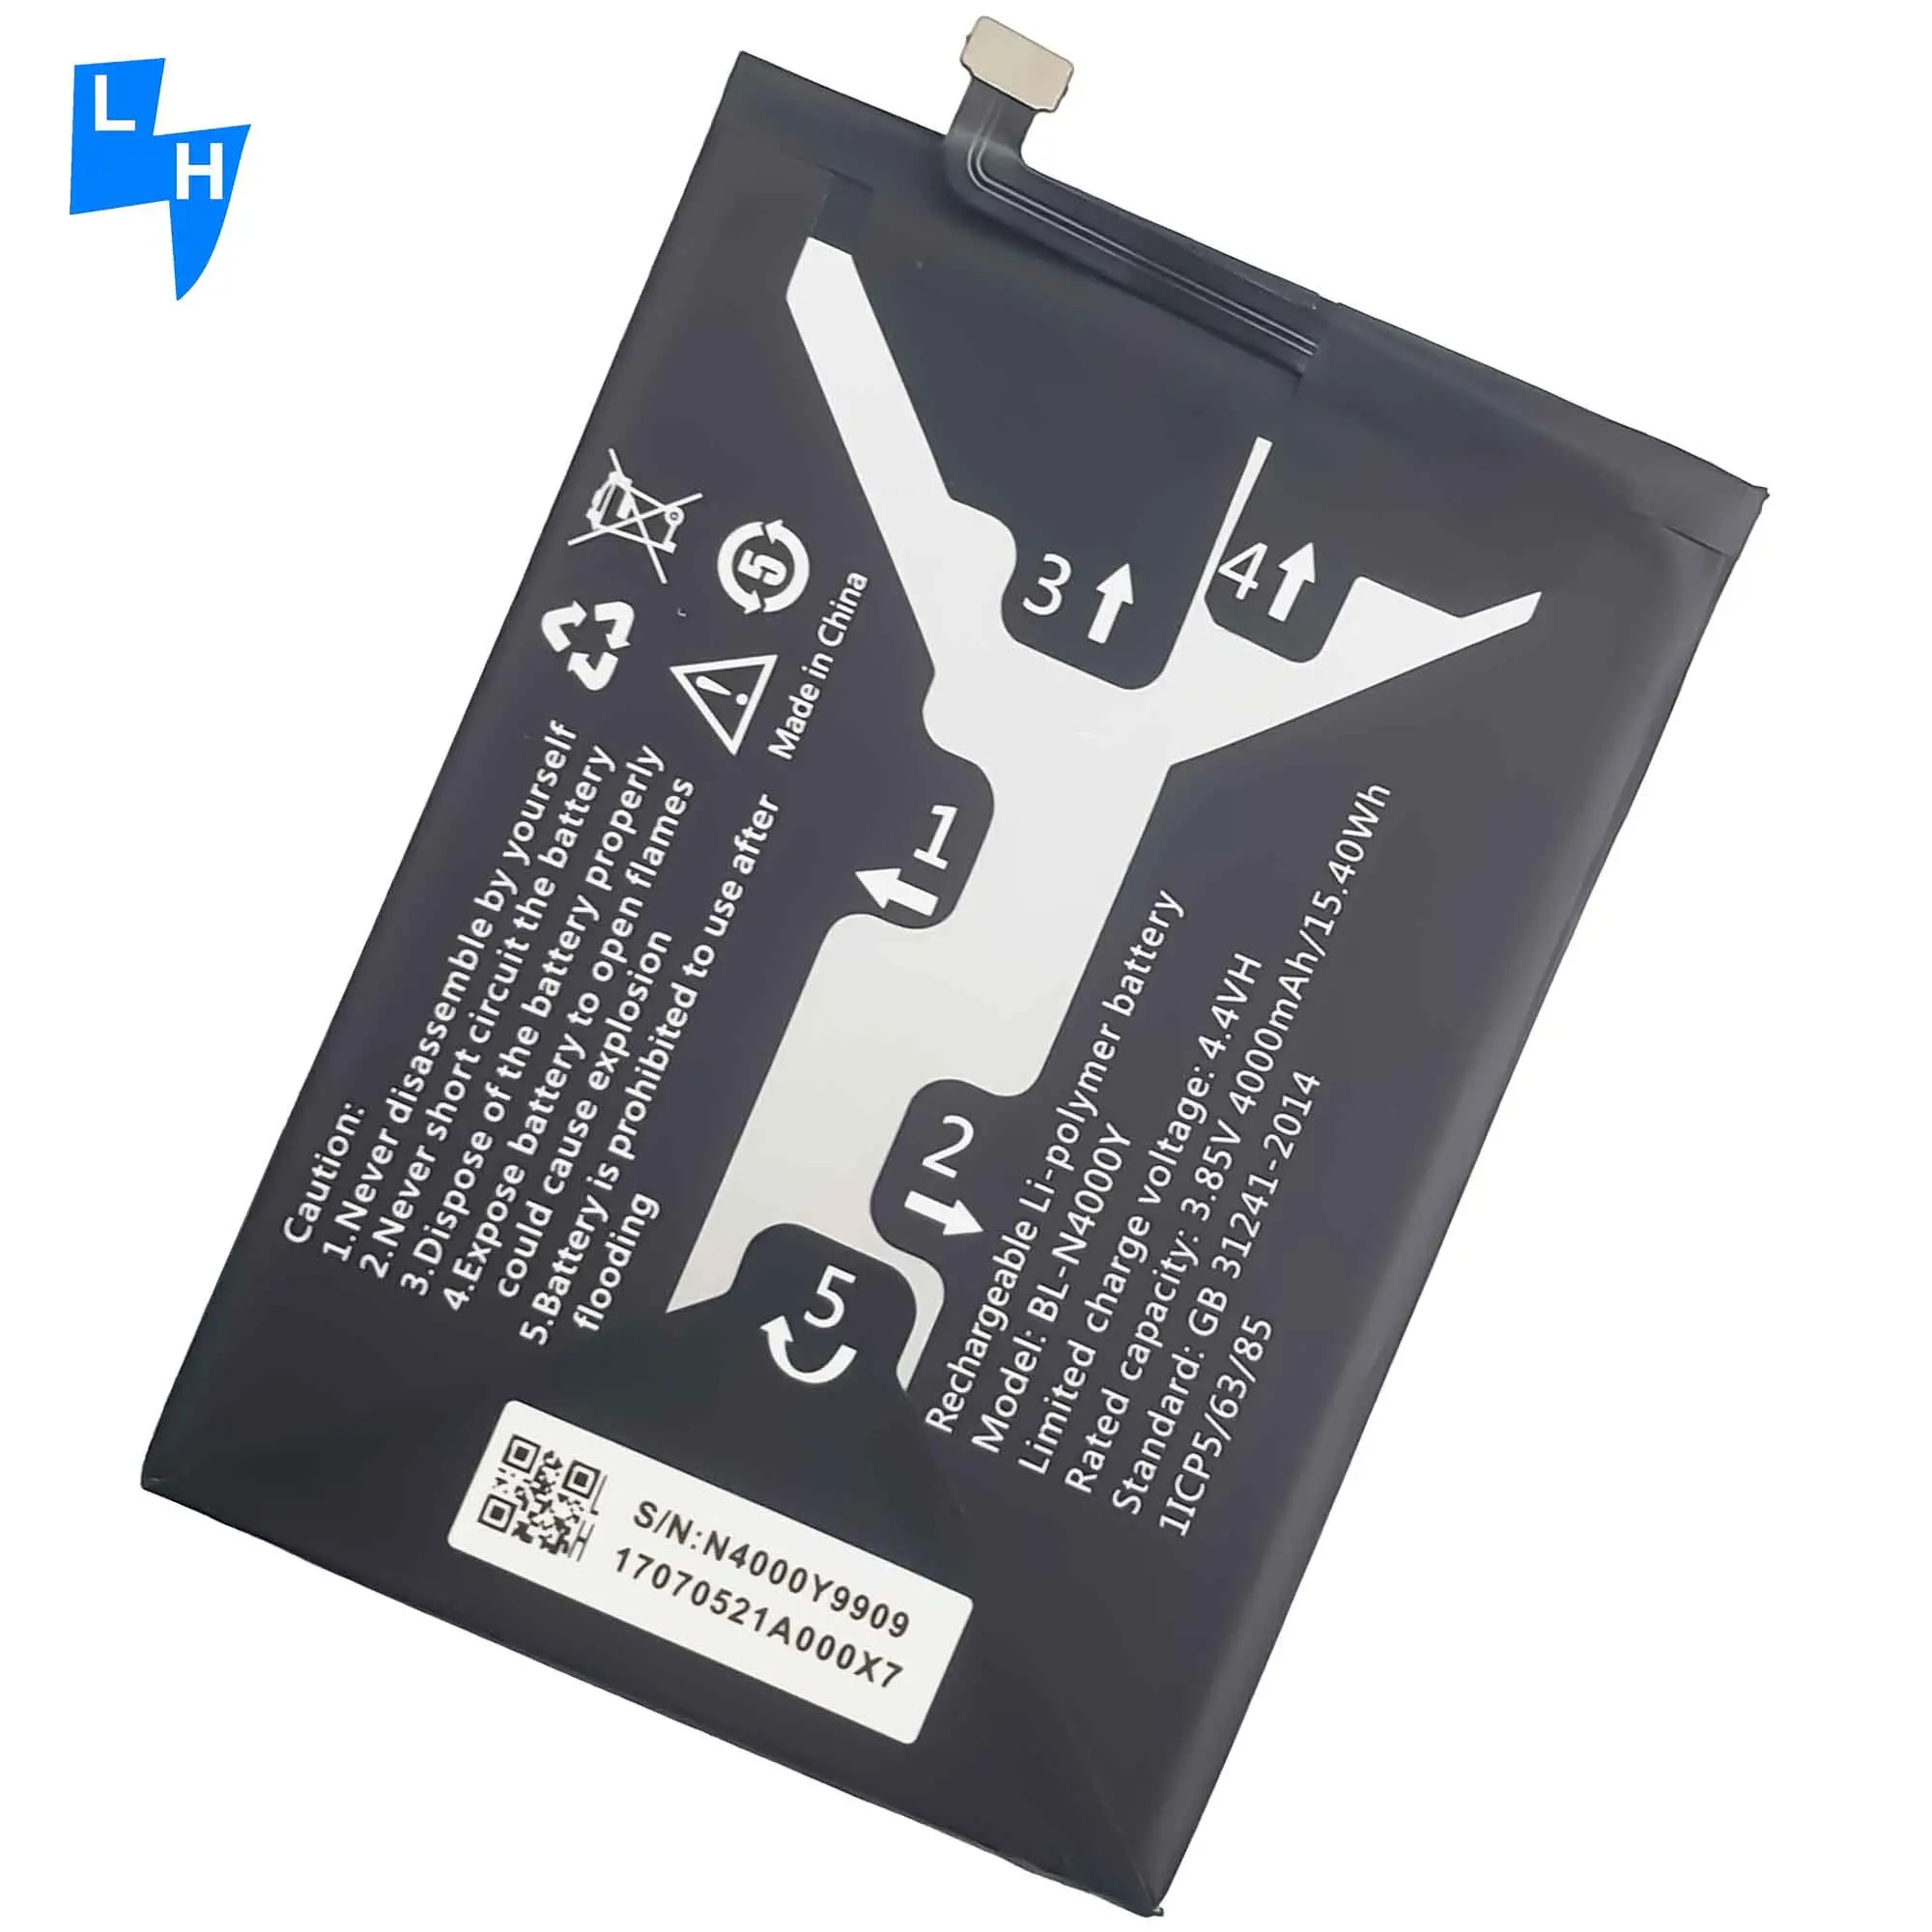 BL-N4000Y A1 Lite S10 Lite mobile phone battery for Gionee X1S